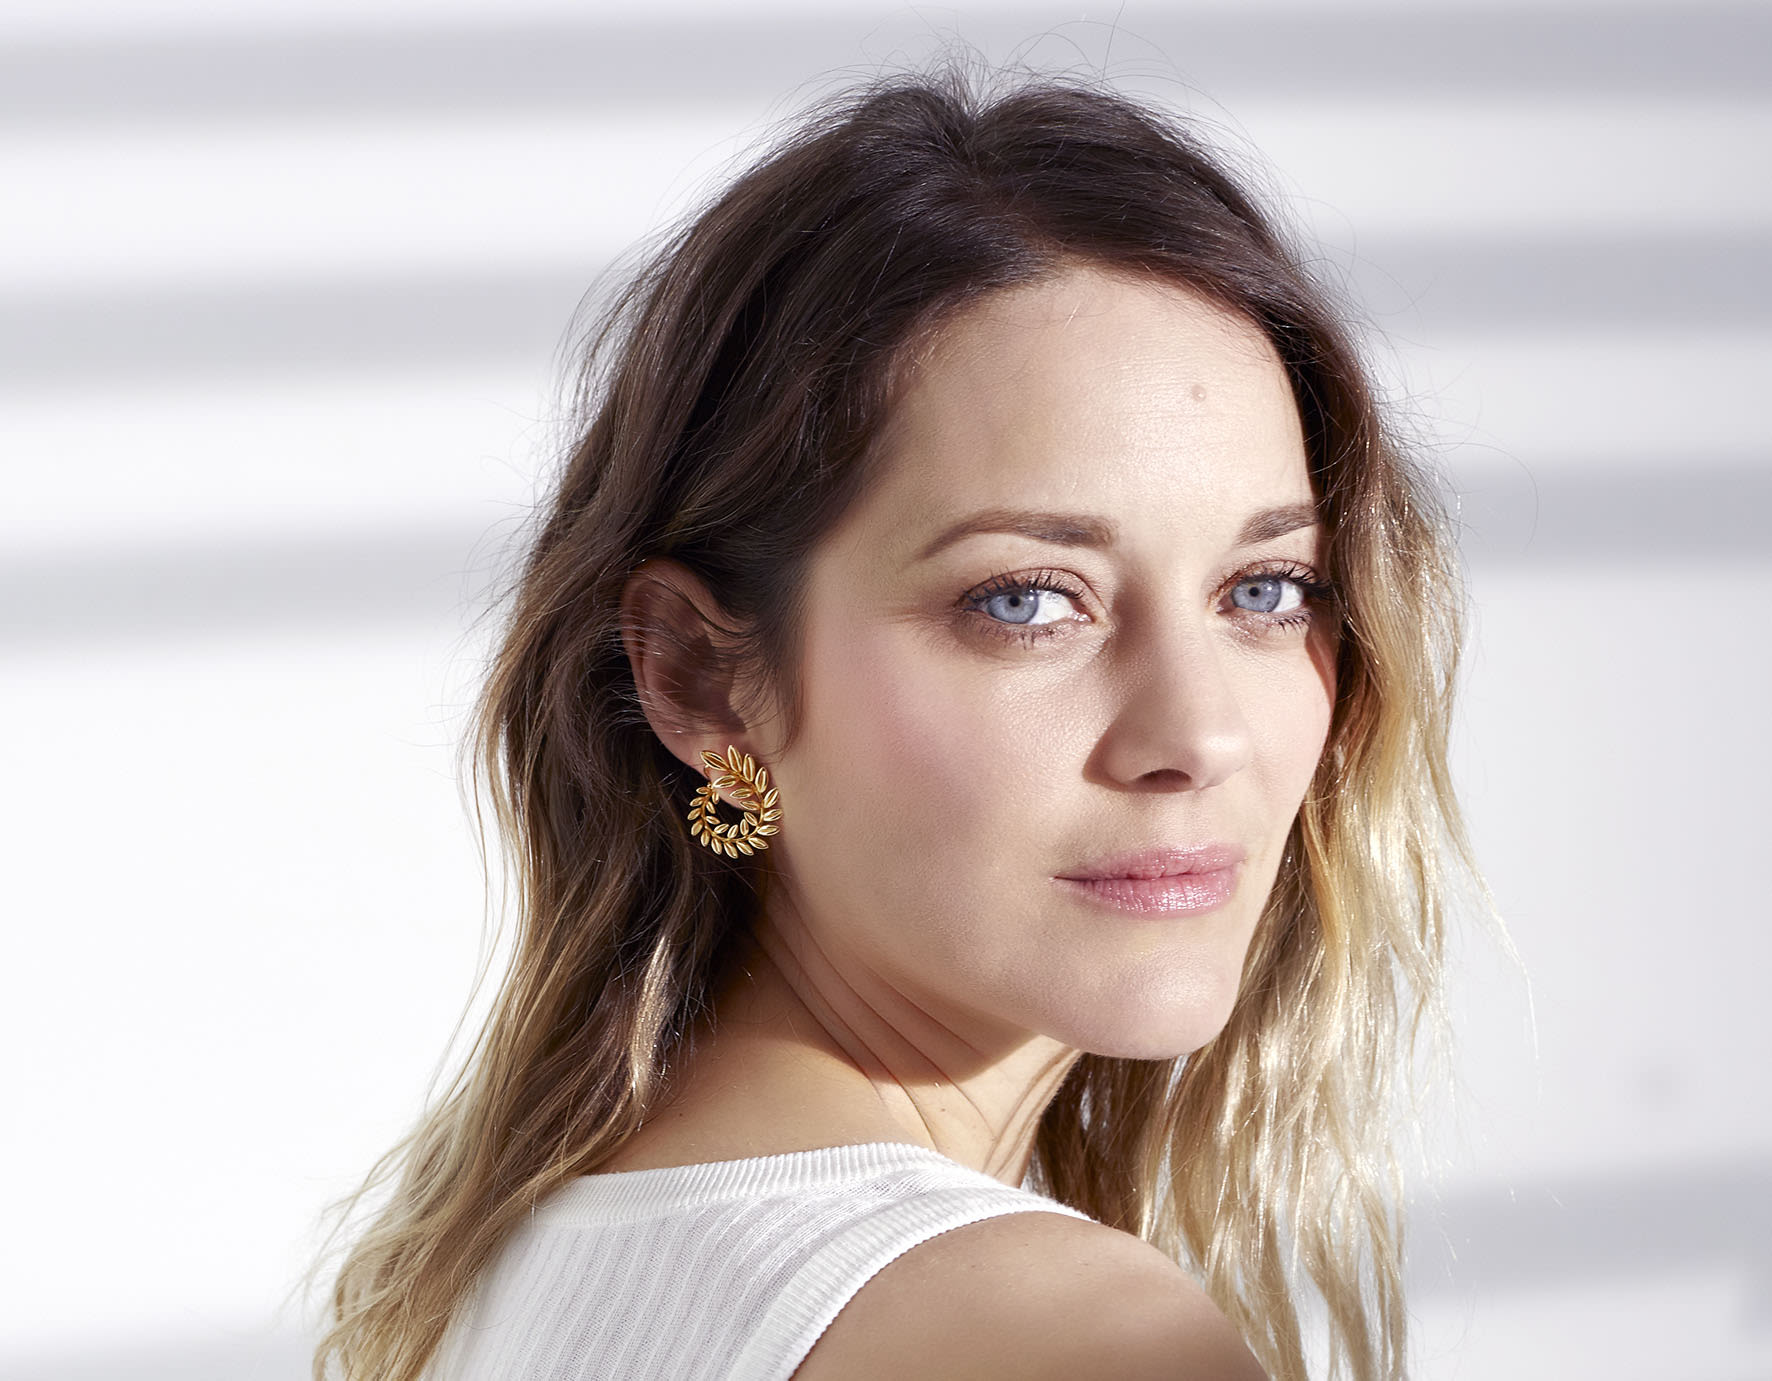 Marion Cotillard Joins Apple’s ‘The Morning Show’ For Season 4